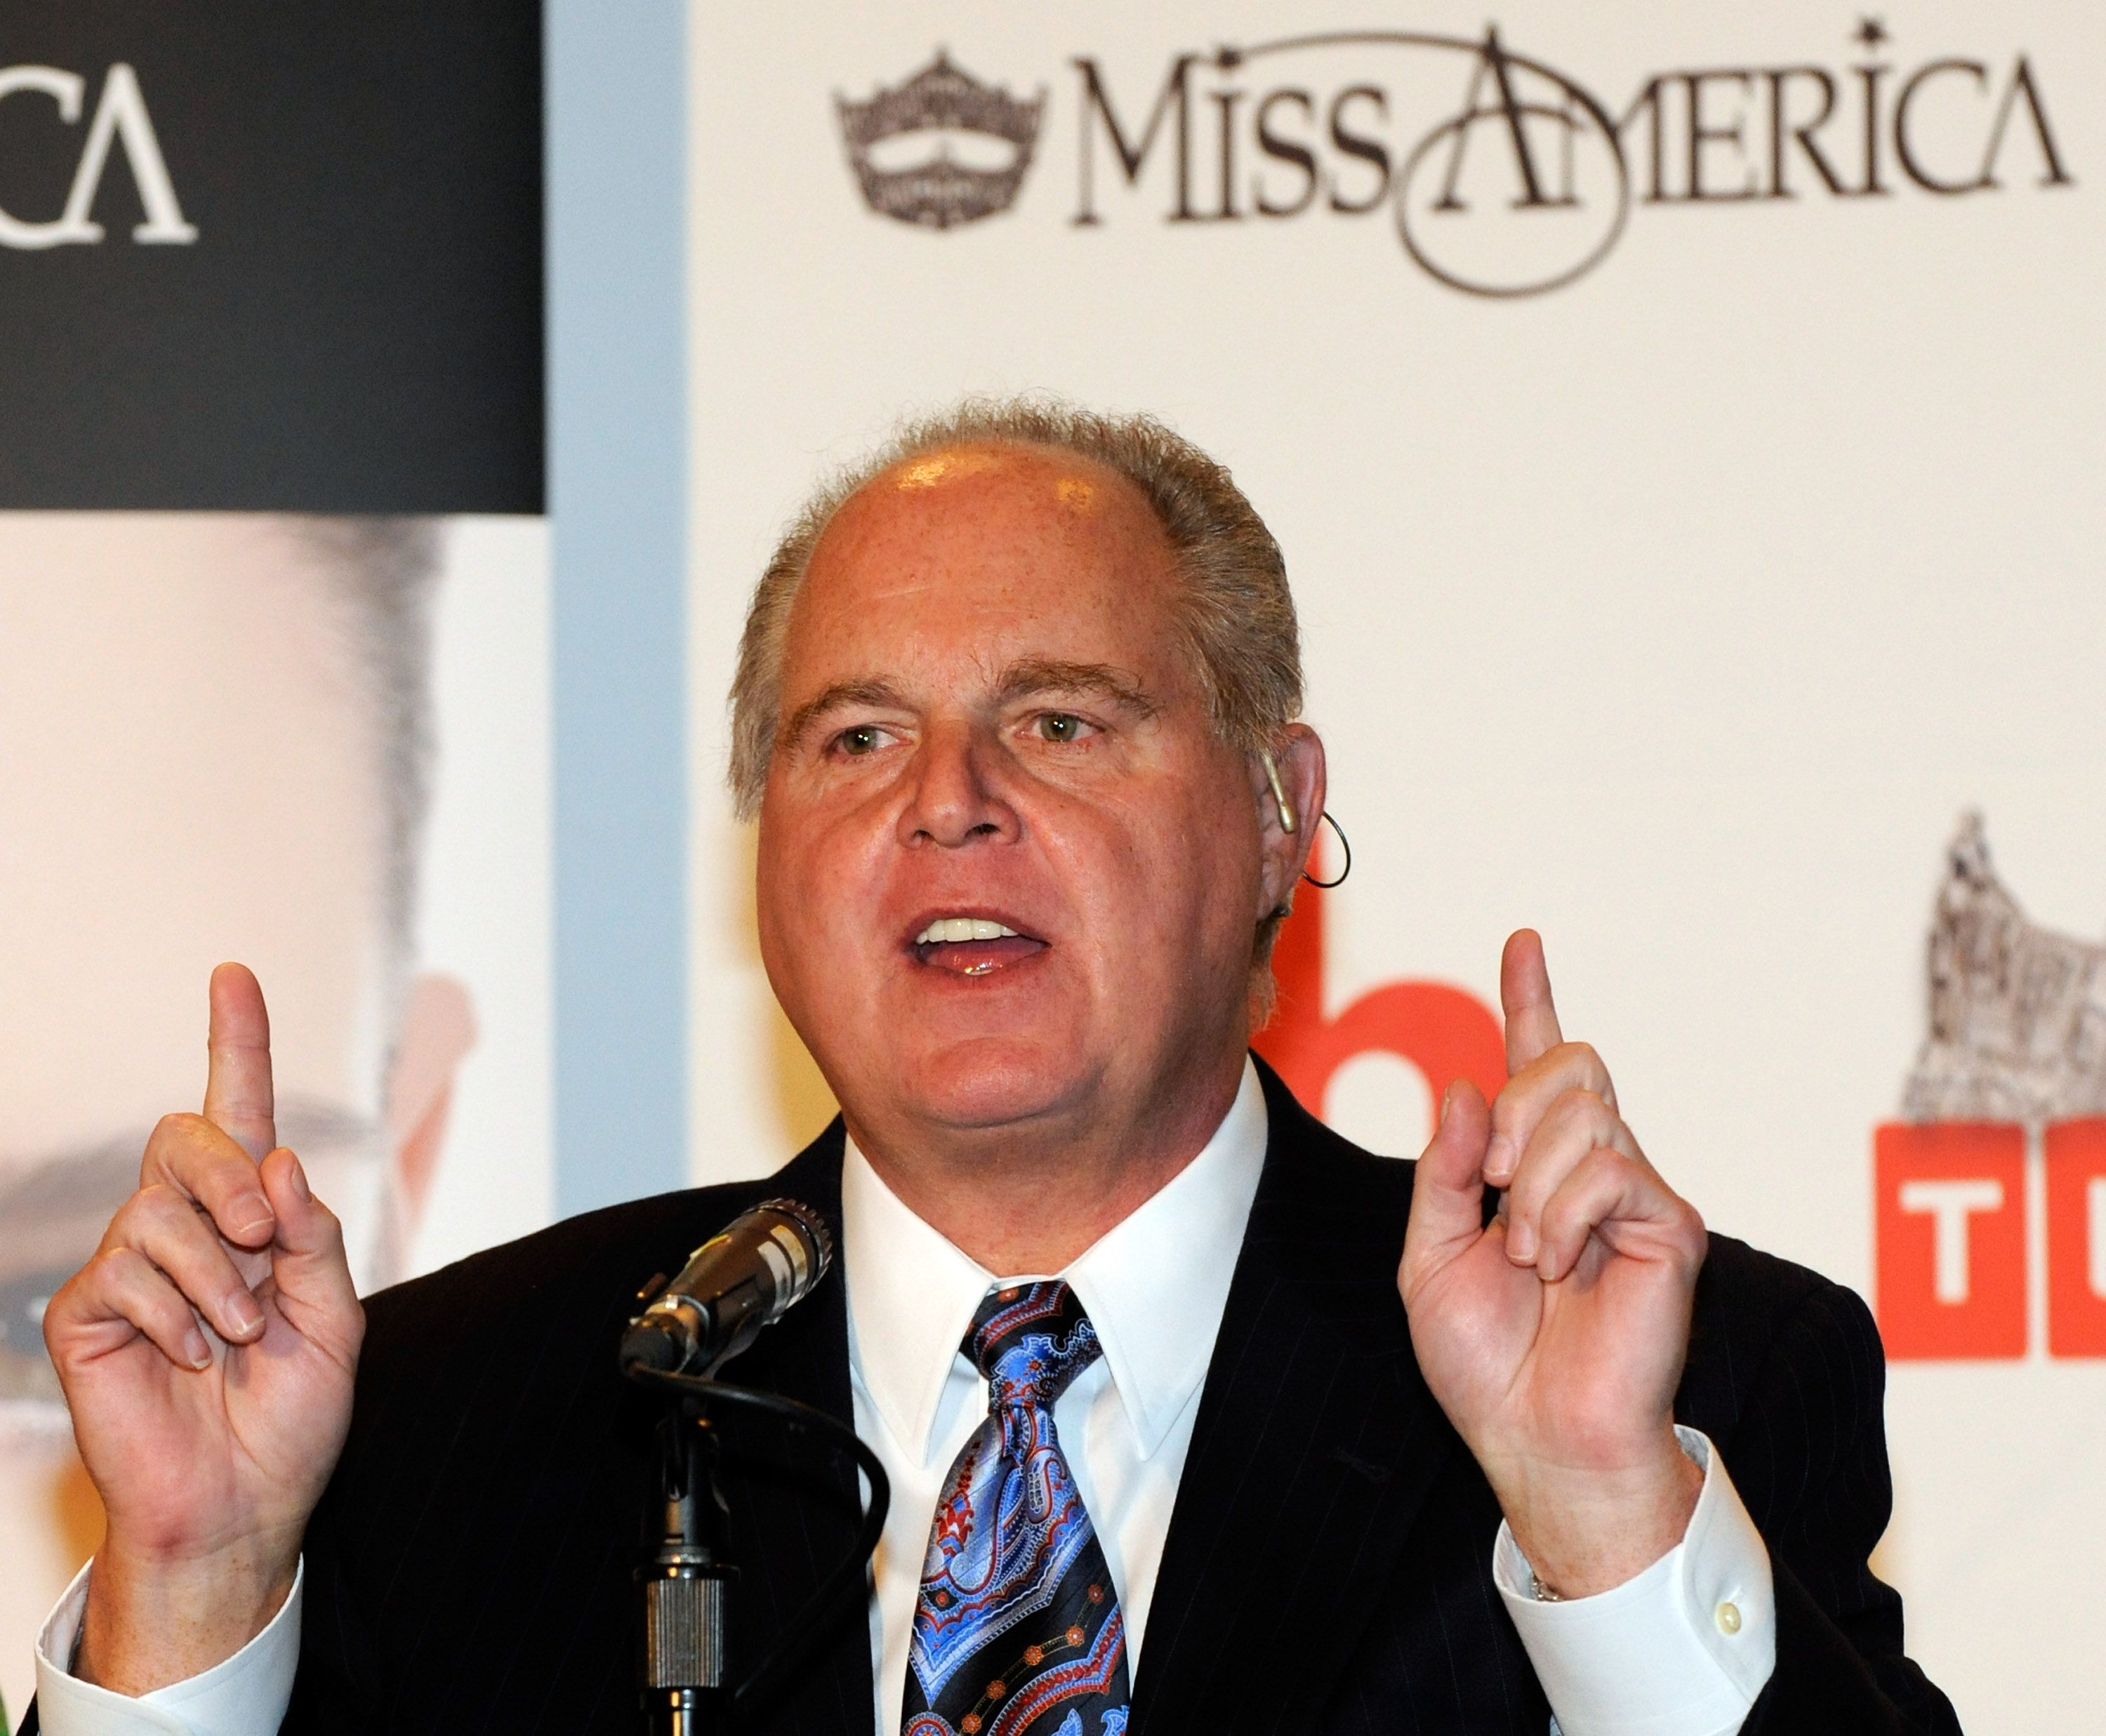 Rush Limbaugh at a news conference for Miss America Pageant judges on January 27, 2010, in Las Vegas, Nevada | Photo: Getty Images